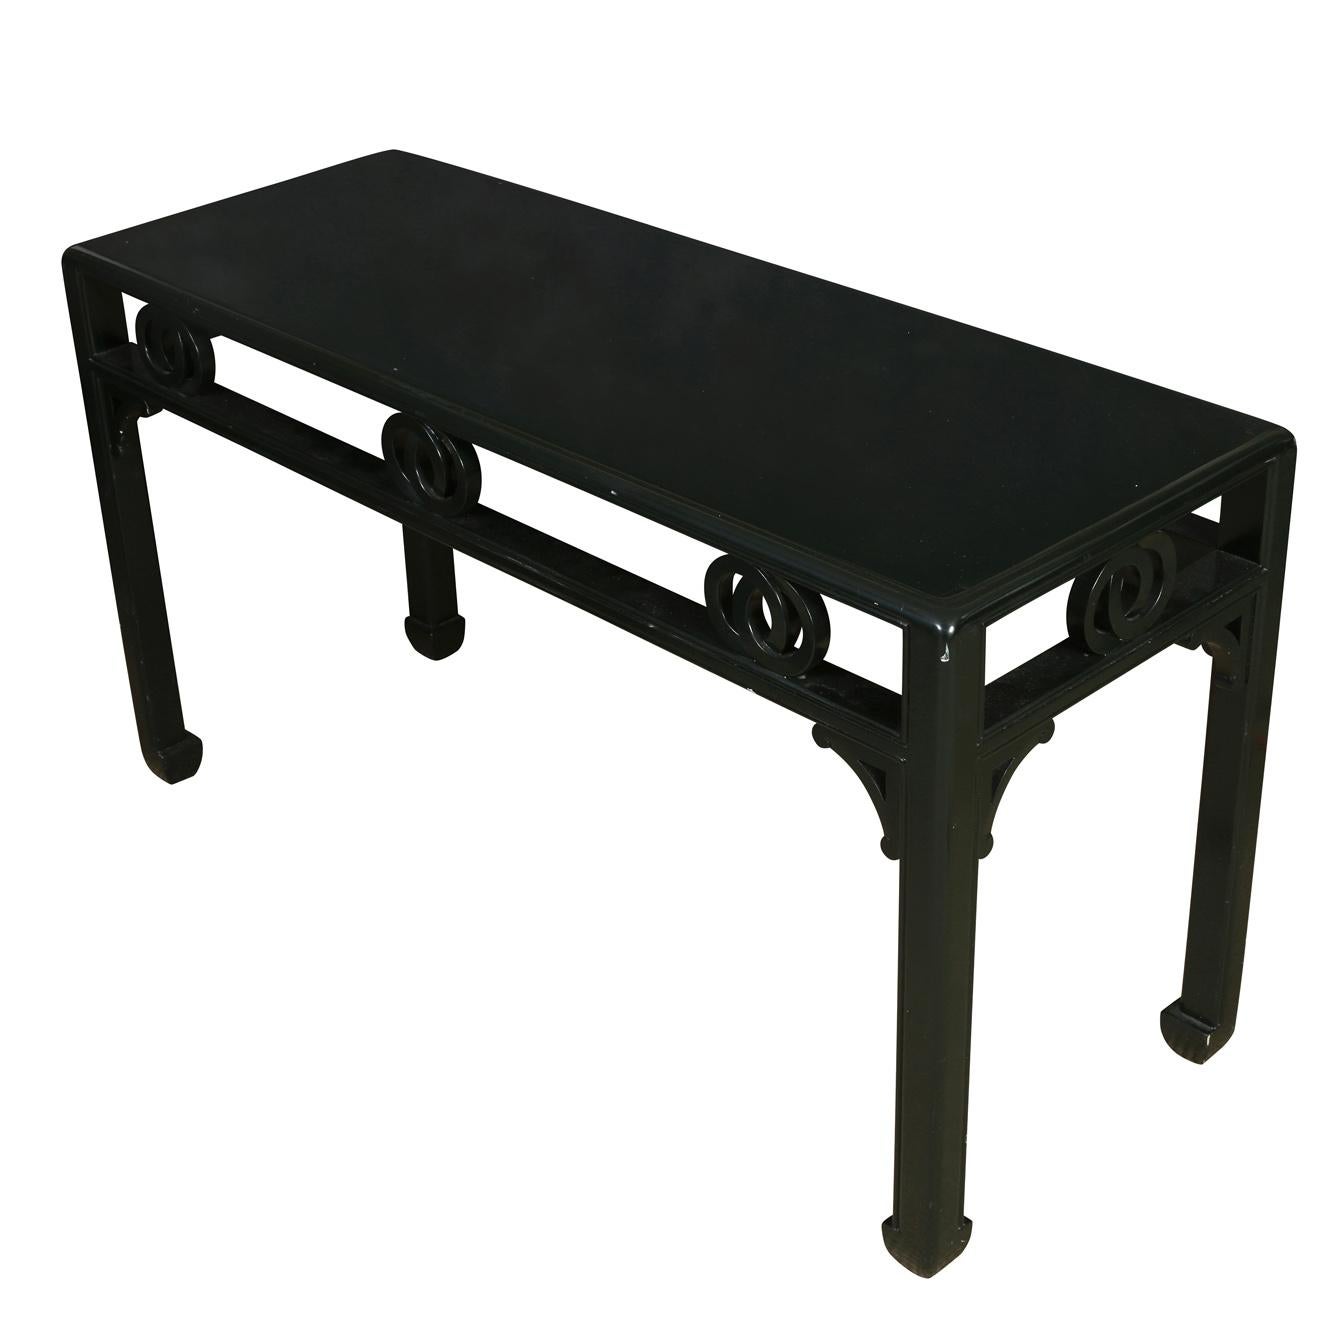 Deep forest green Asian style console table with hoof feet and open work detail to apron.